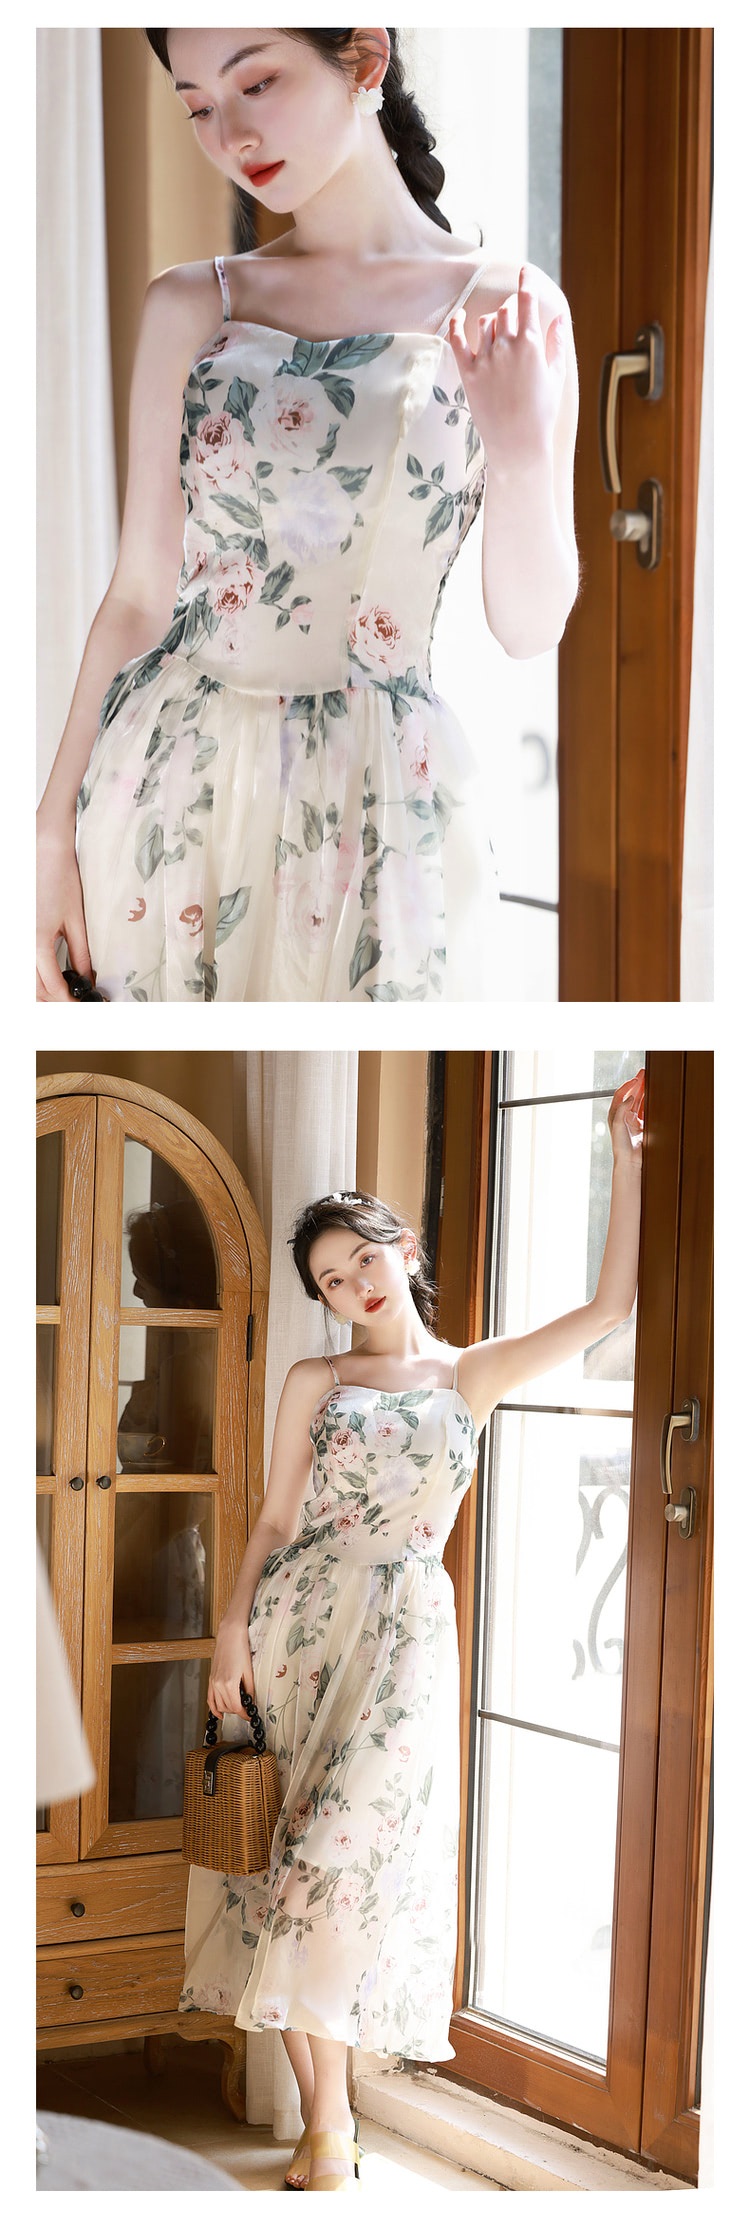 Aesthetic-A-Line-Floral-Printed-Summer-Casual-Slip-Maxi-Dress14.jpg